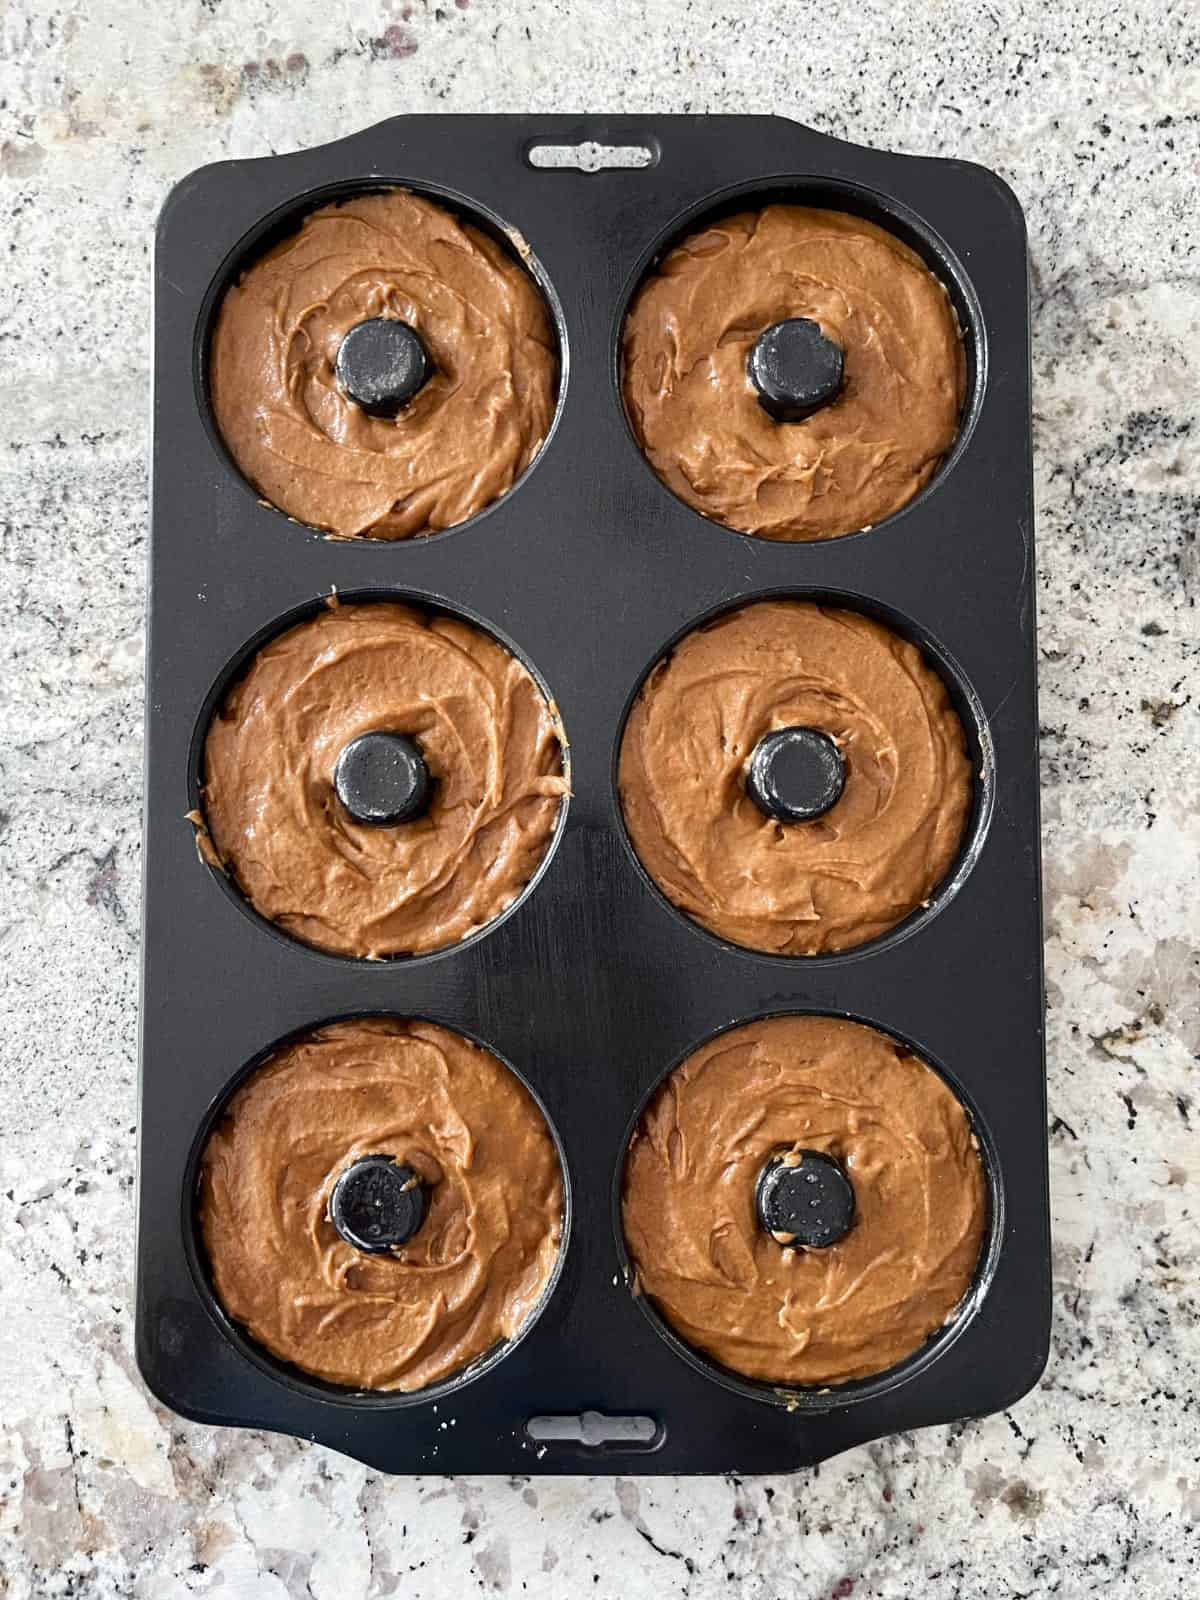 Unbaked pumpkin spice latte donuts in pan on granite counter.